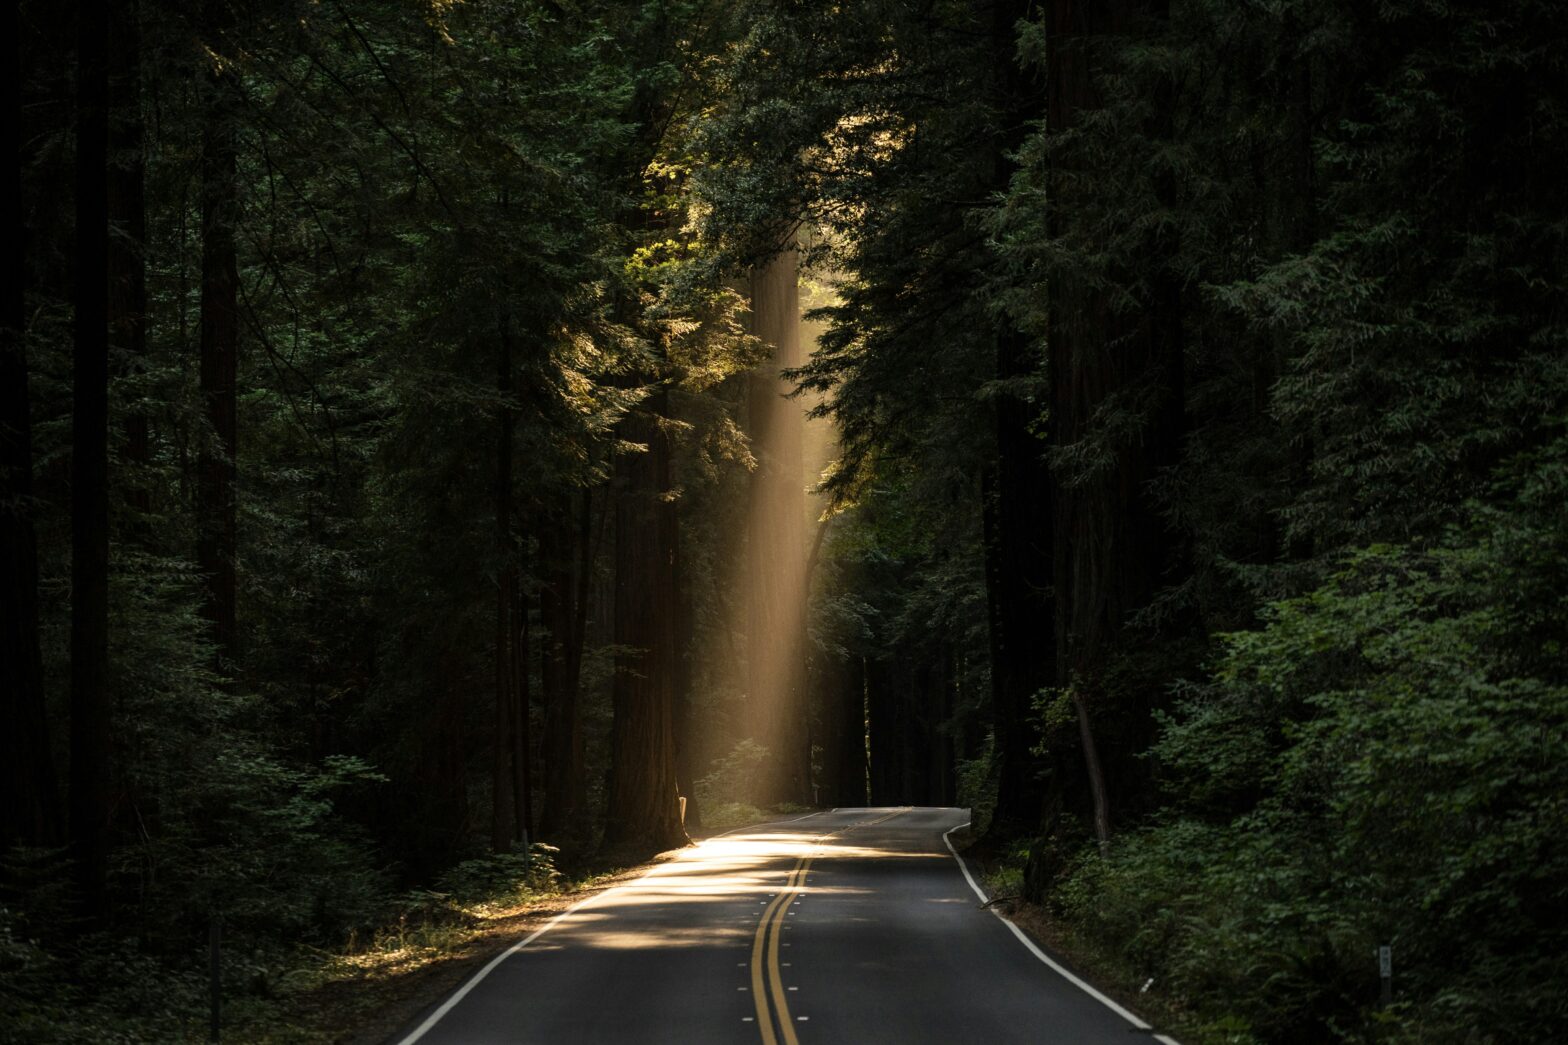 A shaft of sunlights hits a tarmac road in a dense forest. Photo by JOHN TOWNER on Unsplash